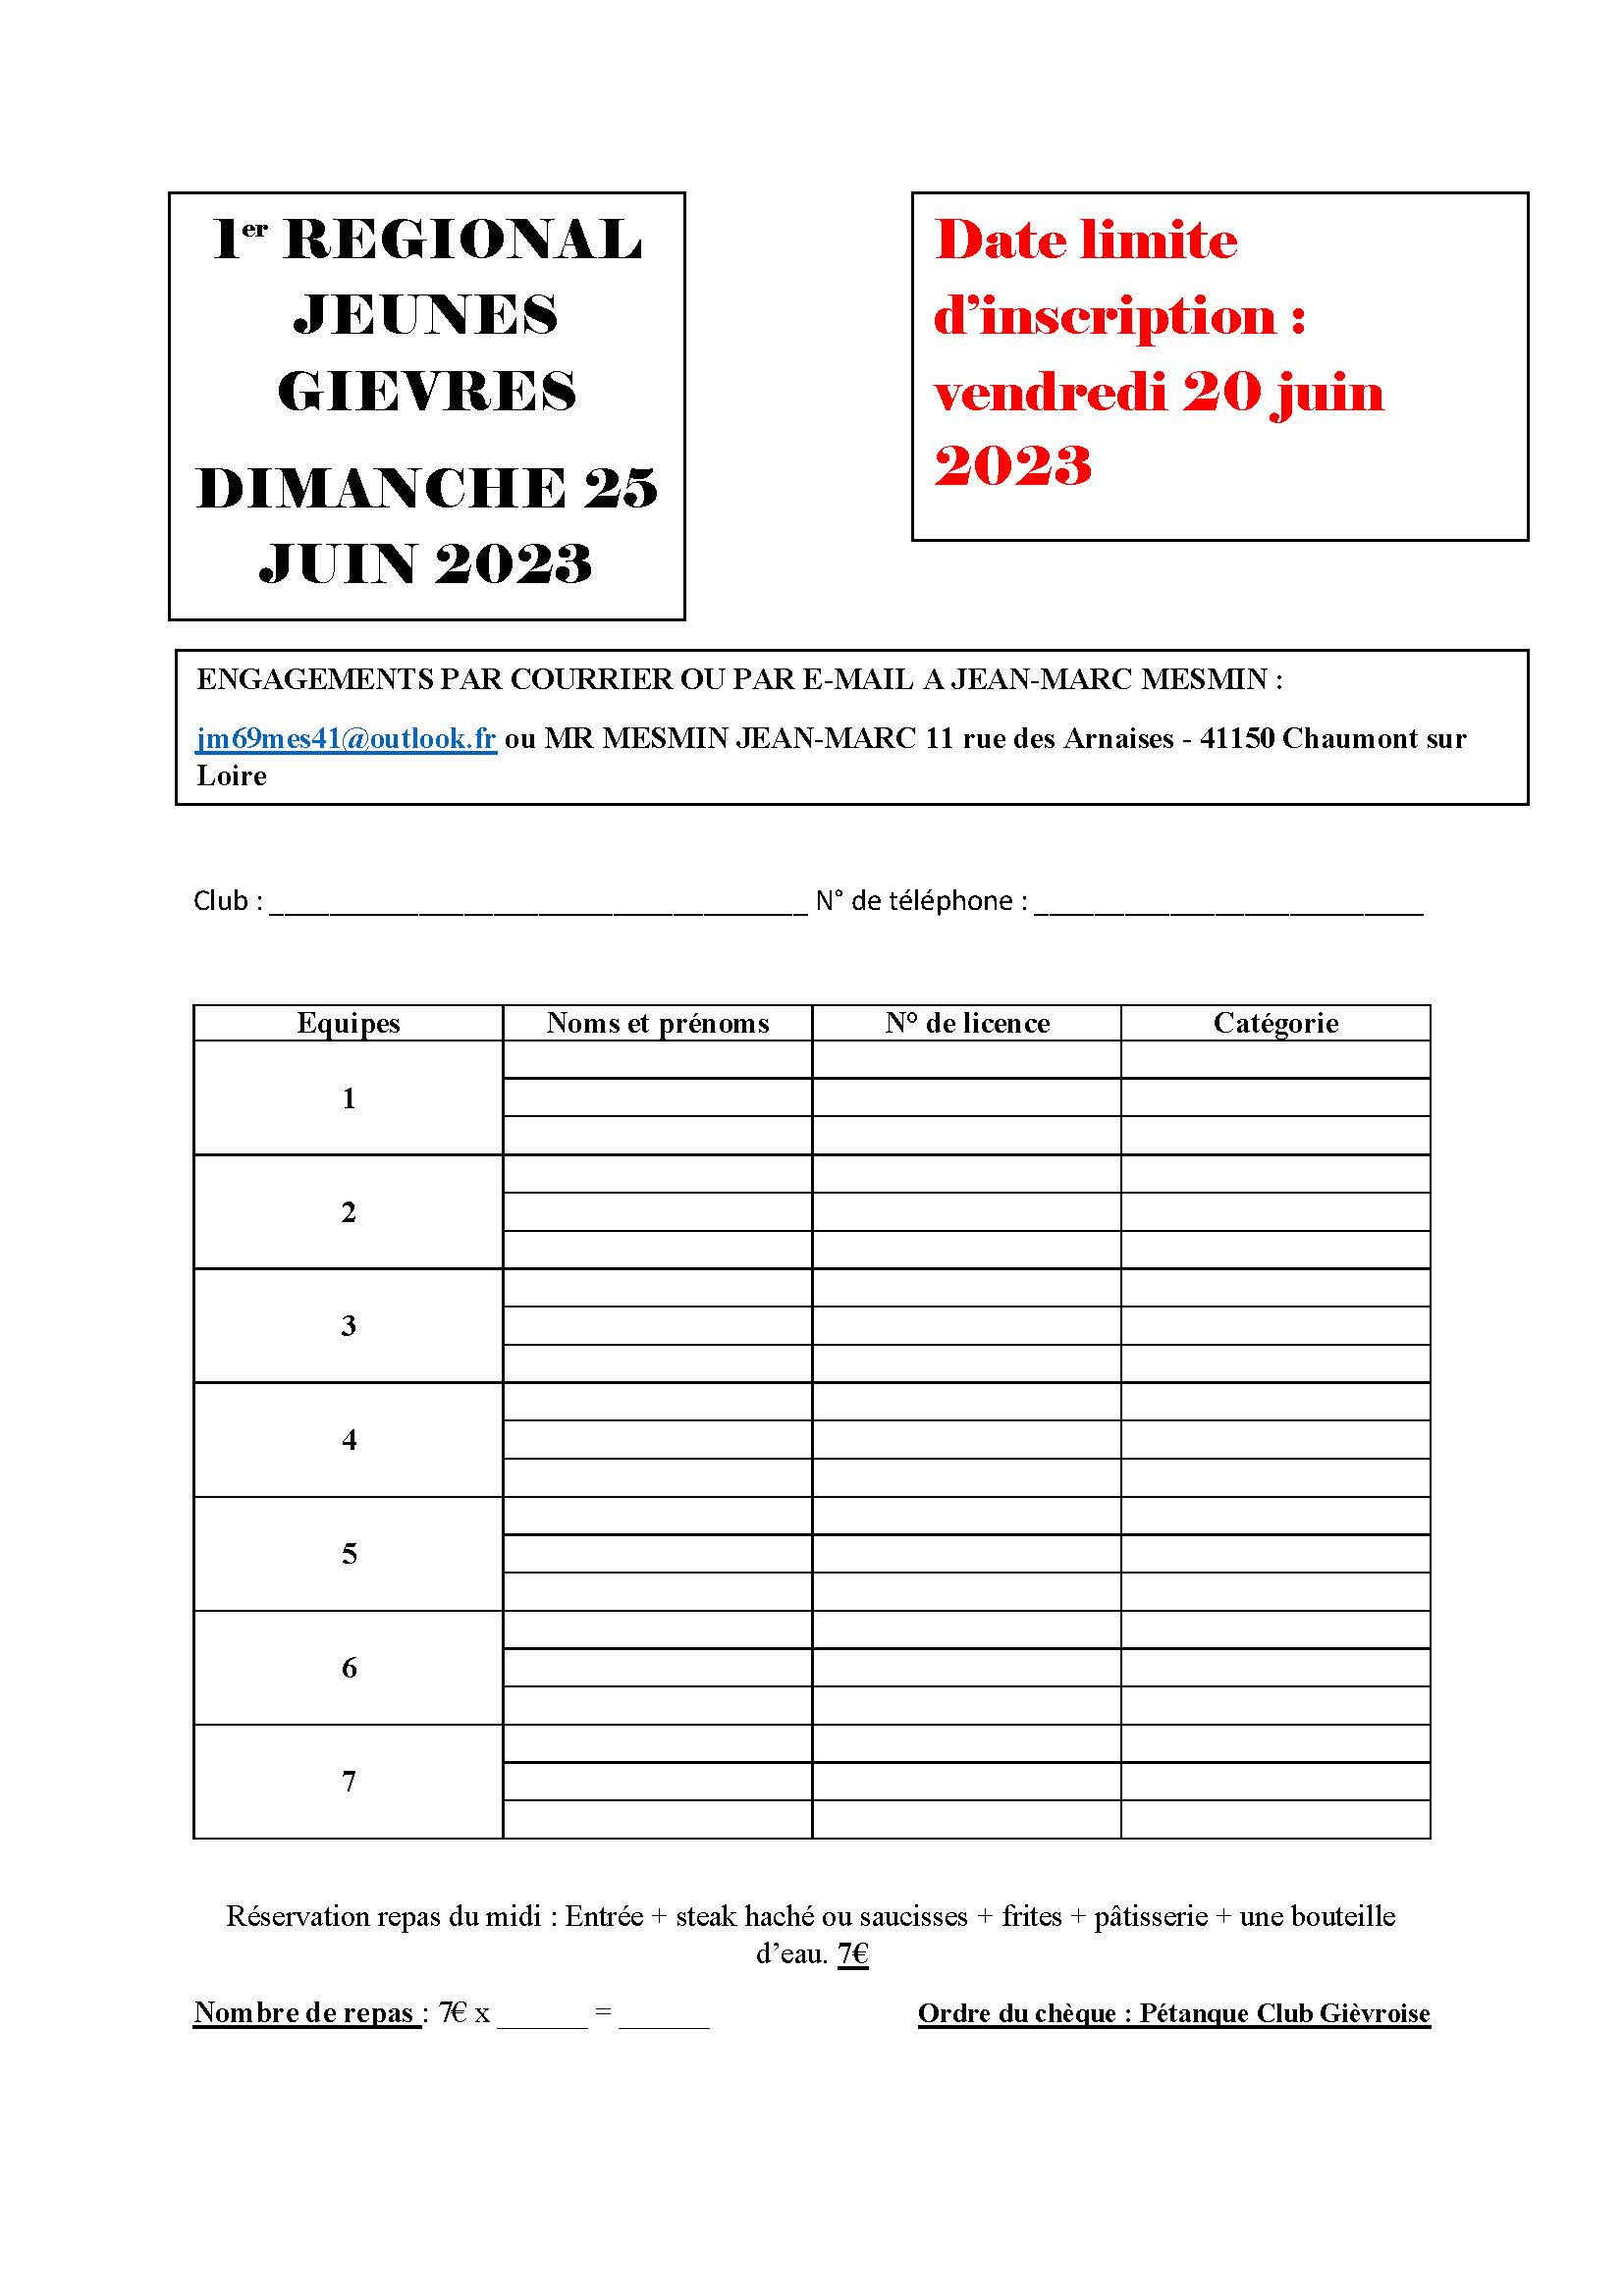 inscrip gievres Page 1